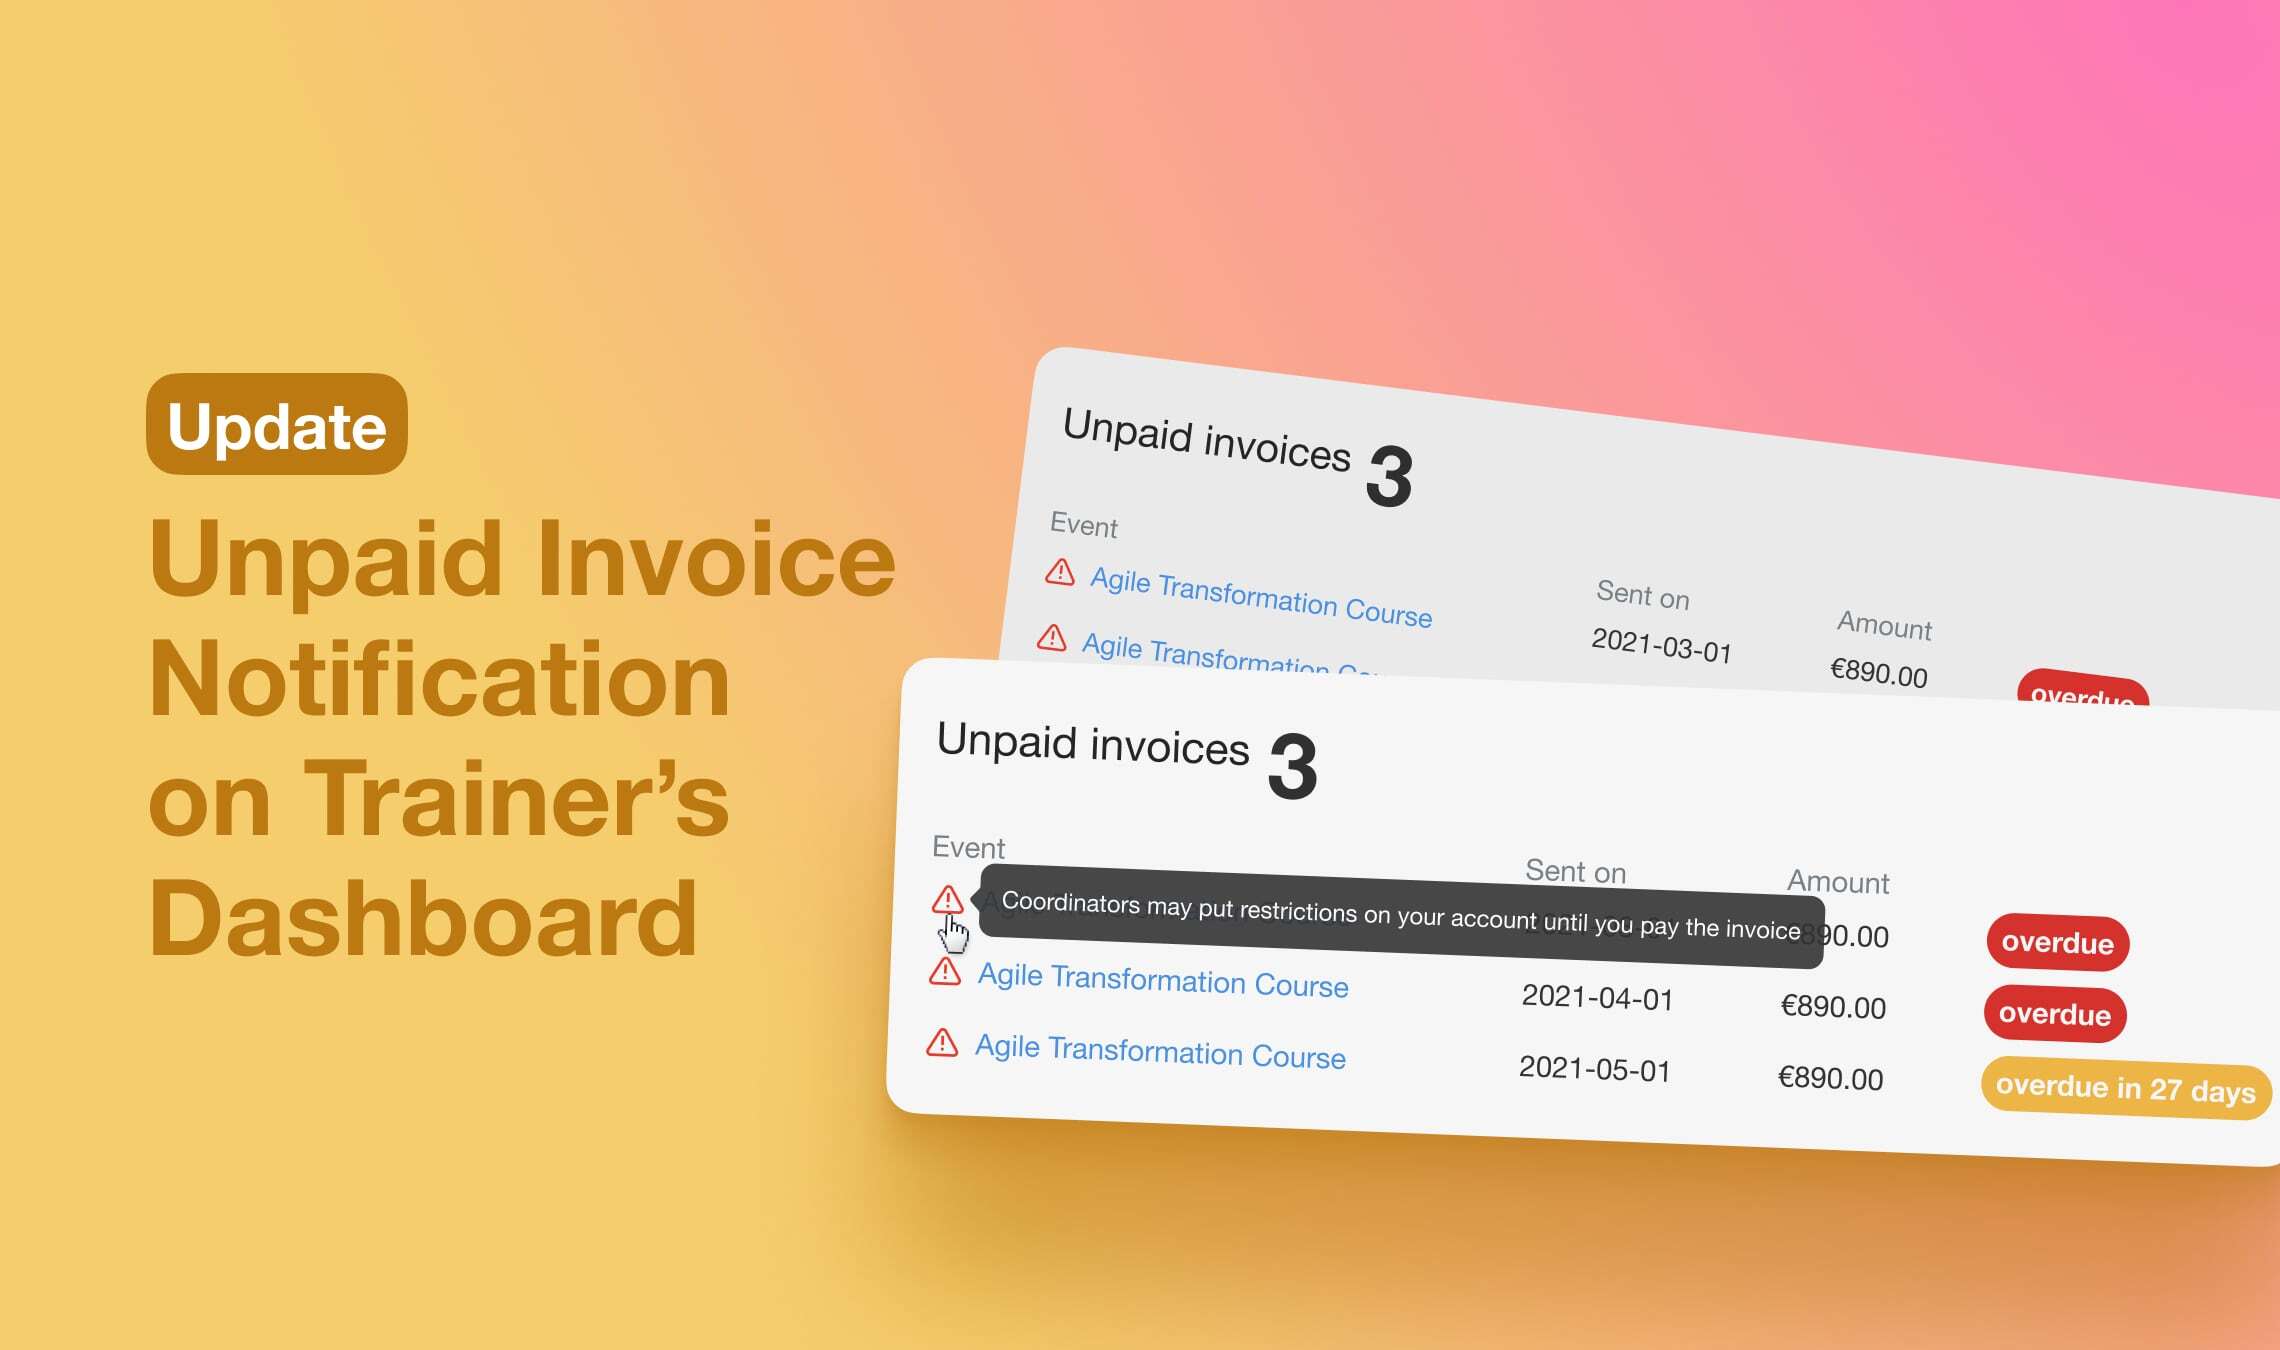 Unpaid Invoice Notifications on Trainer’s Dashboard